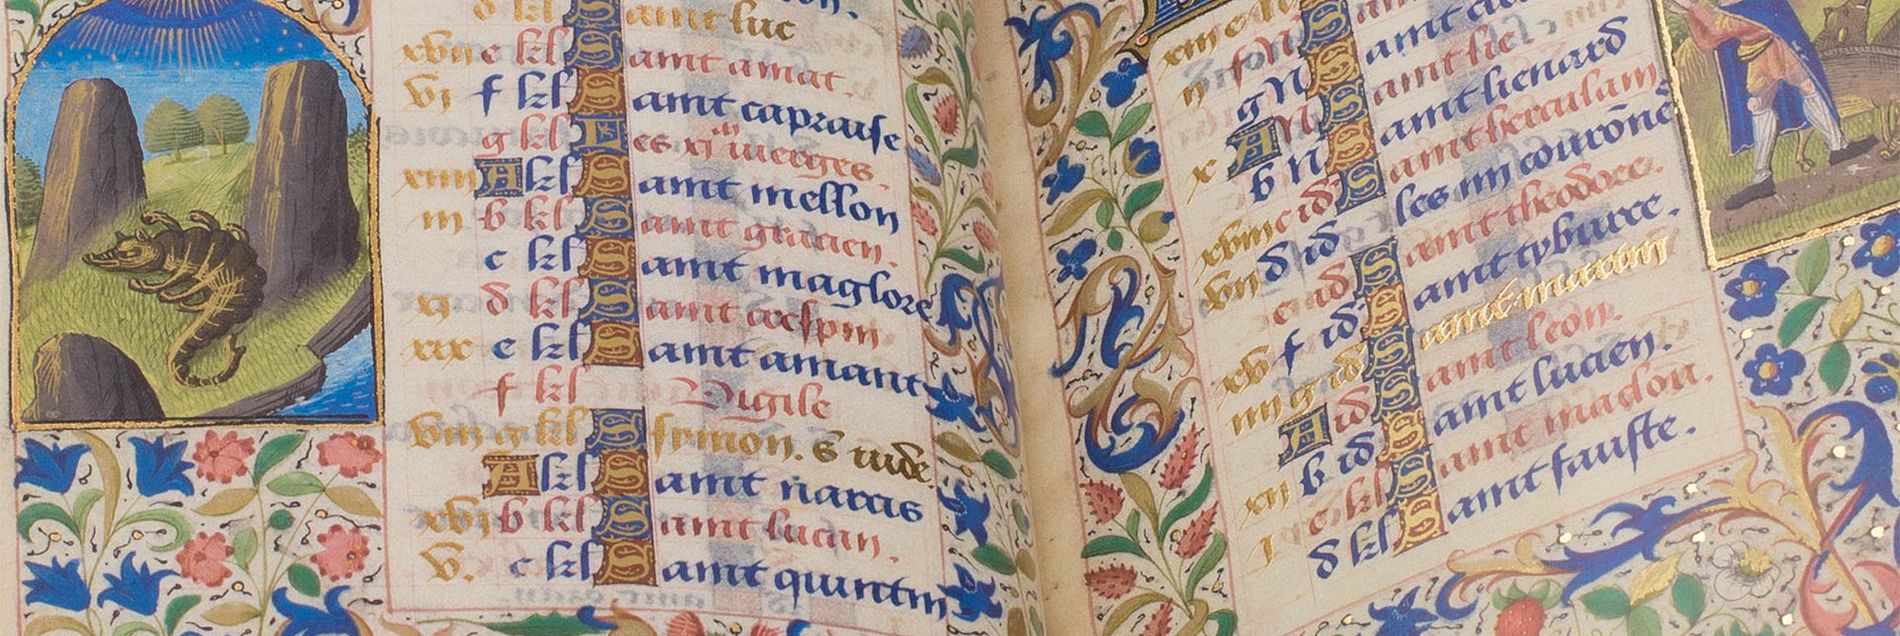 <i>“A lovingly designed book of hours from the heyday of the French Renaissance”</i>